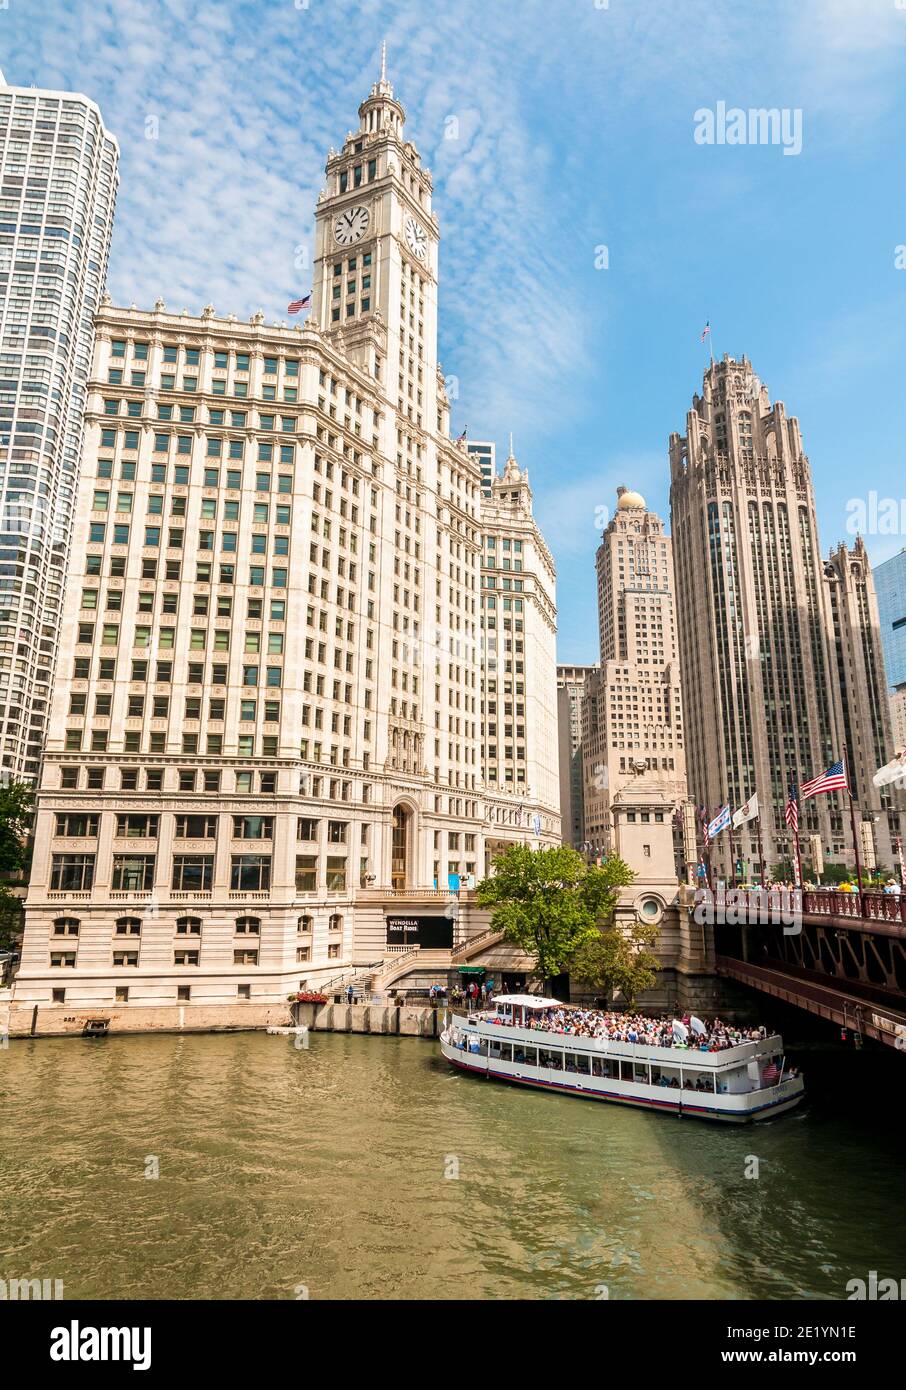 Chicago, Illinois, USA - August 24, 2014: Wendella Boat Rides architectural tour the Chicago river in Chicago Downtown, USA Stock Photo